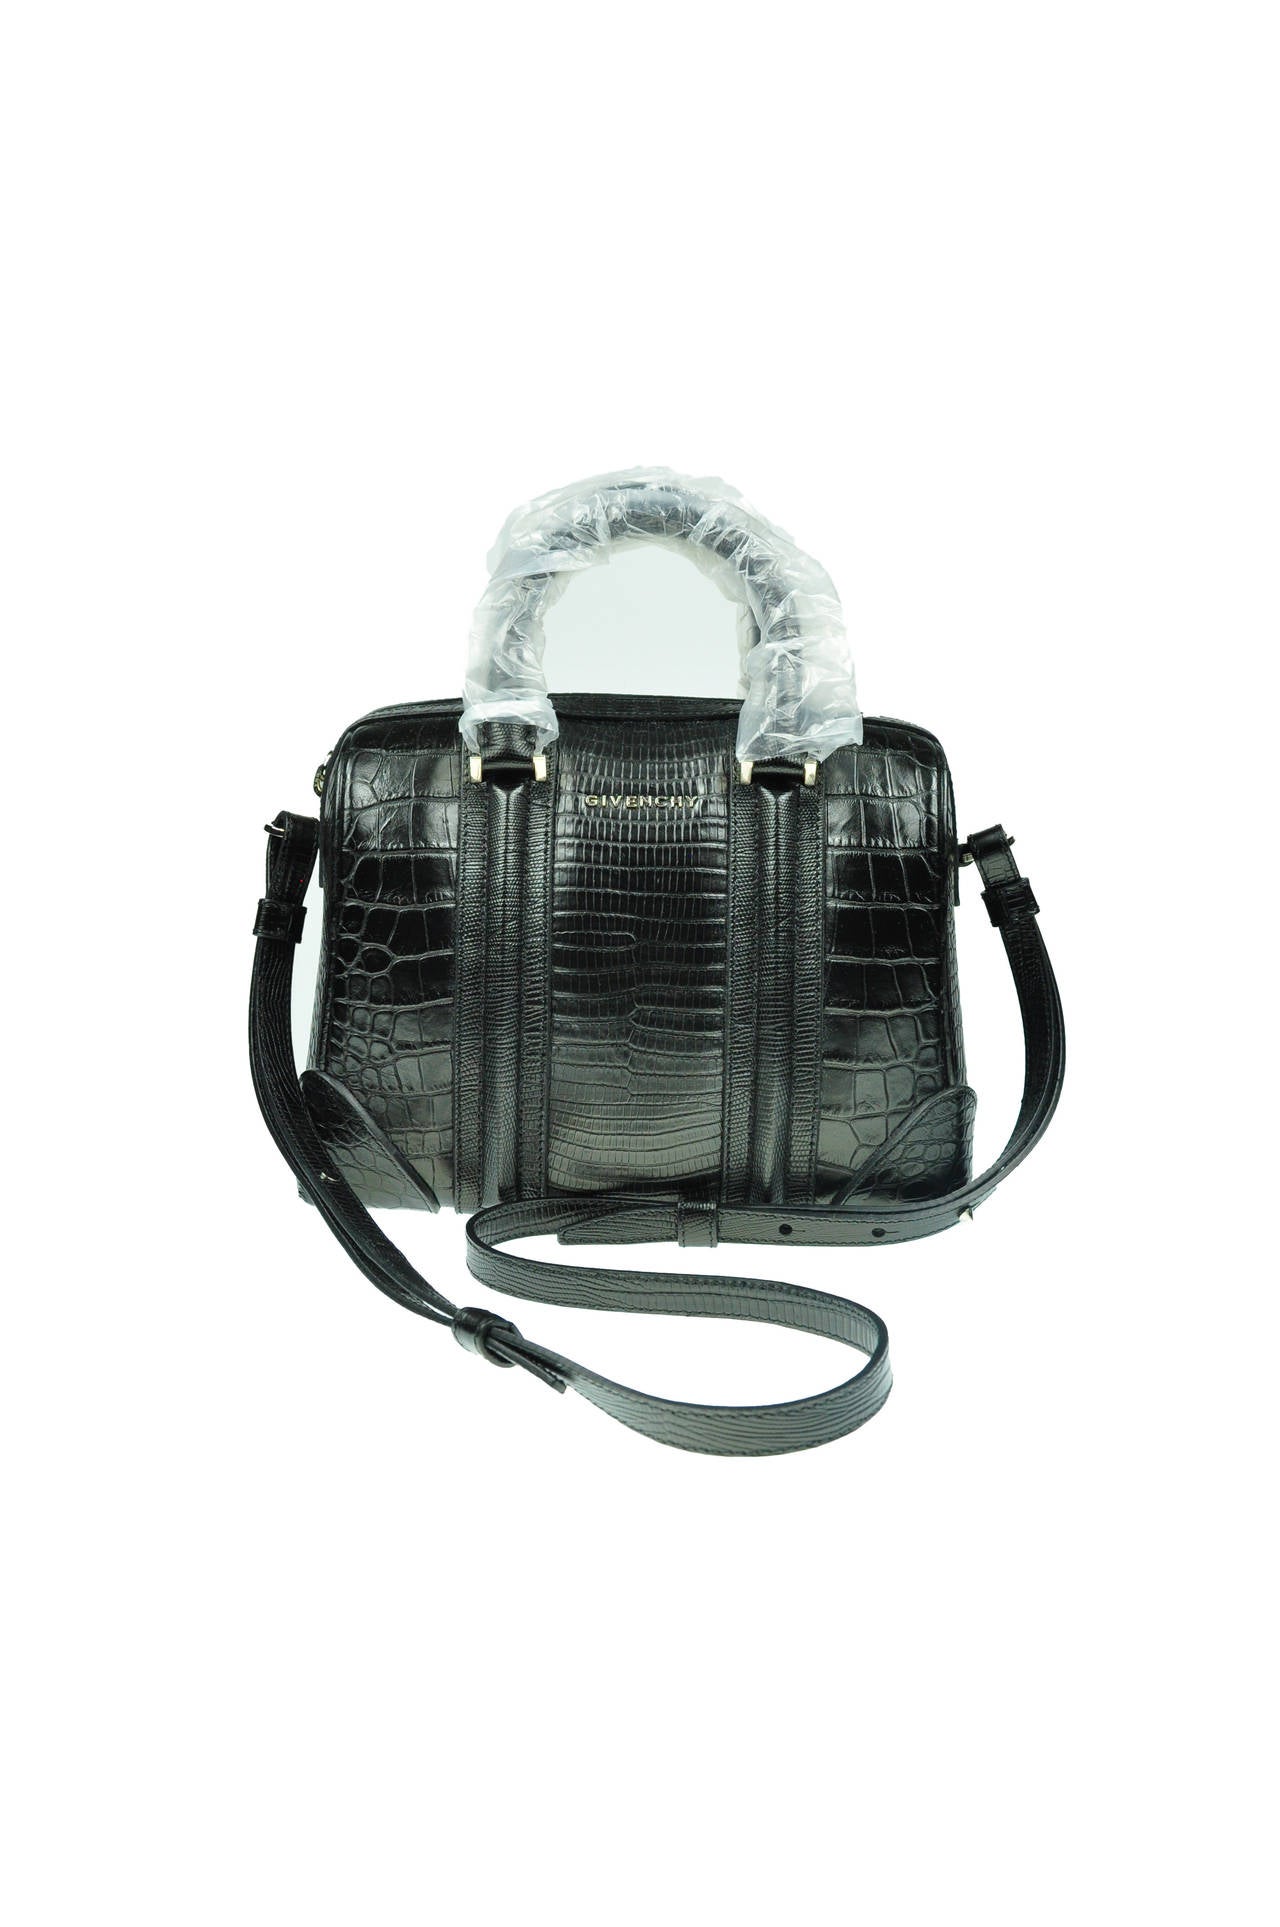 Givenchy Lucrezia Black Crocodile Embossed Mini Bag In New Condition In Hong Kong, Hong Kong